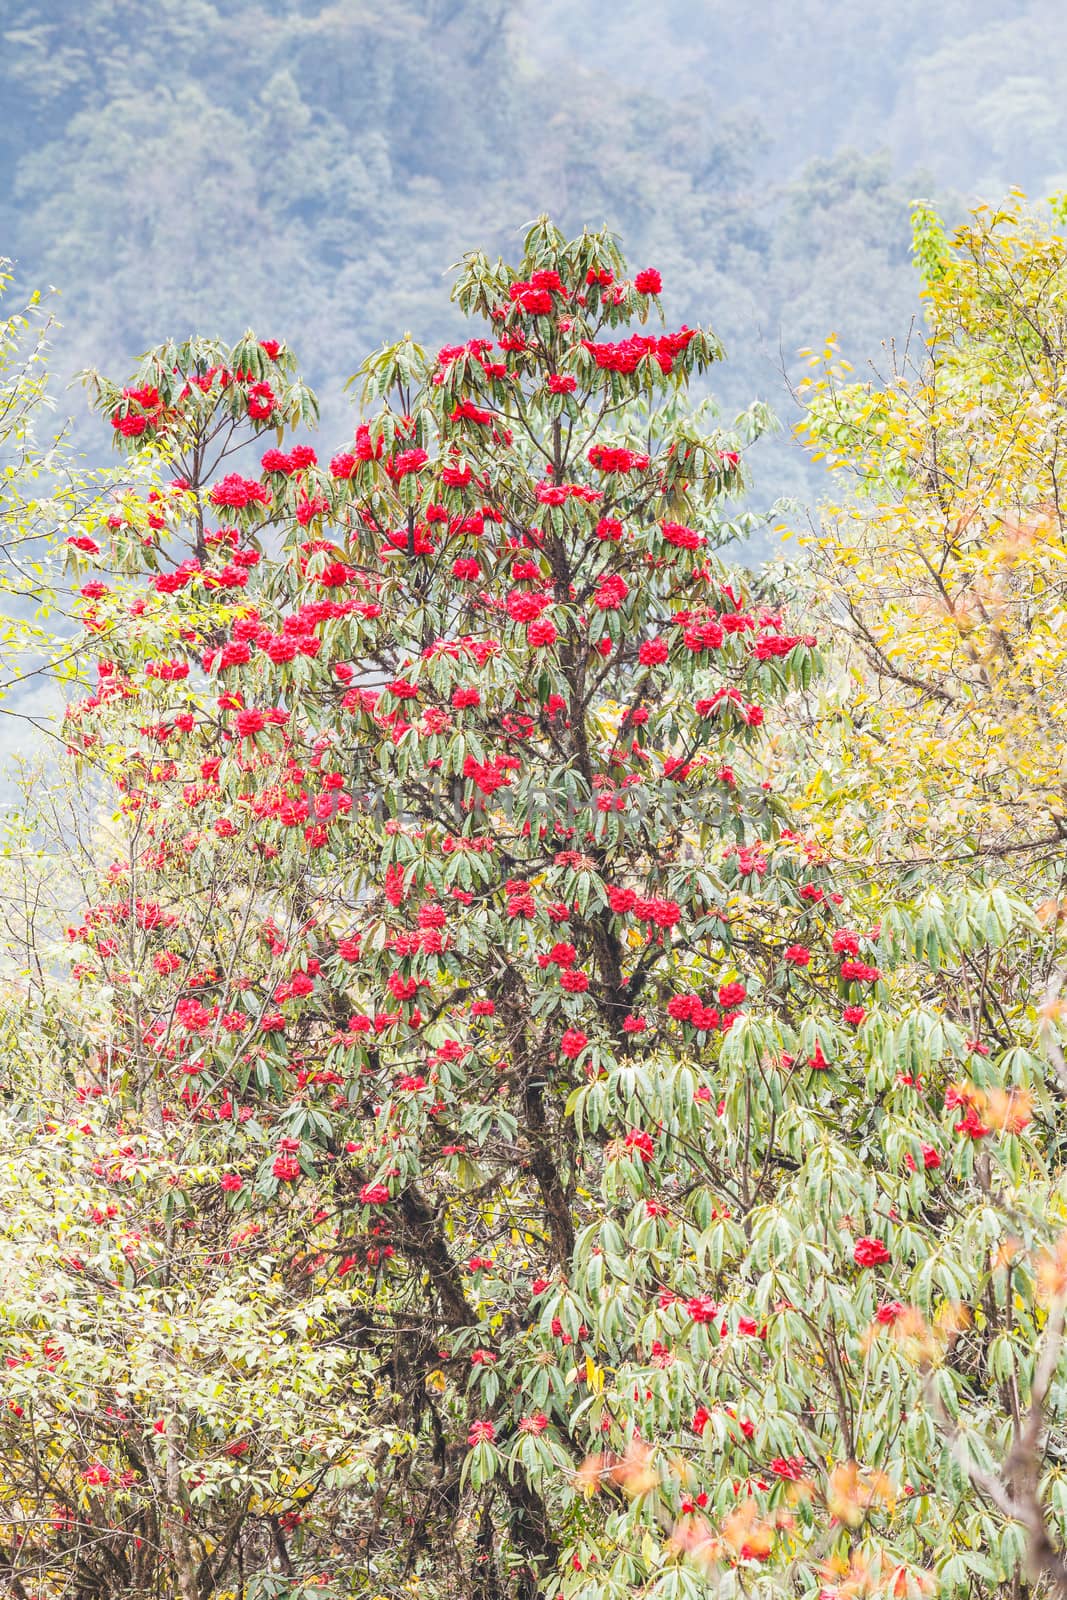 Rhododendron plants are the Himalayas, on the mountain by jame_j@homail.com